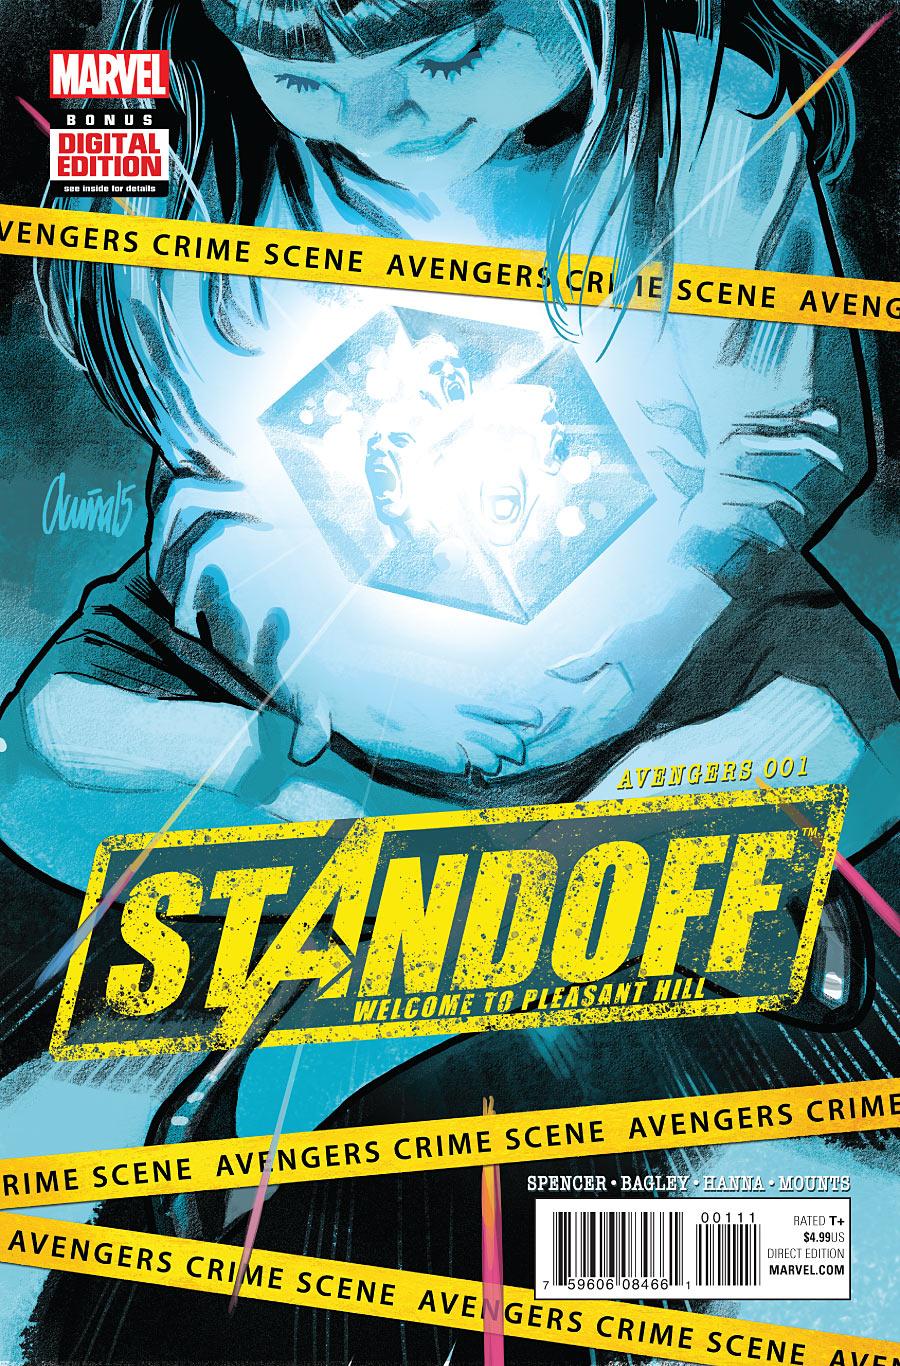 Avengers Standoff: Welcome to Pleasant Hill Vol. 1 #1